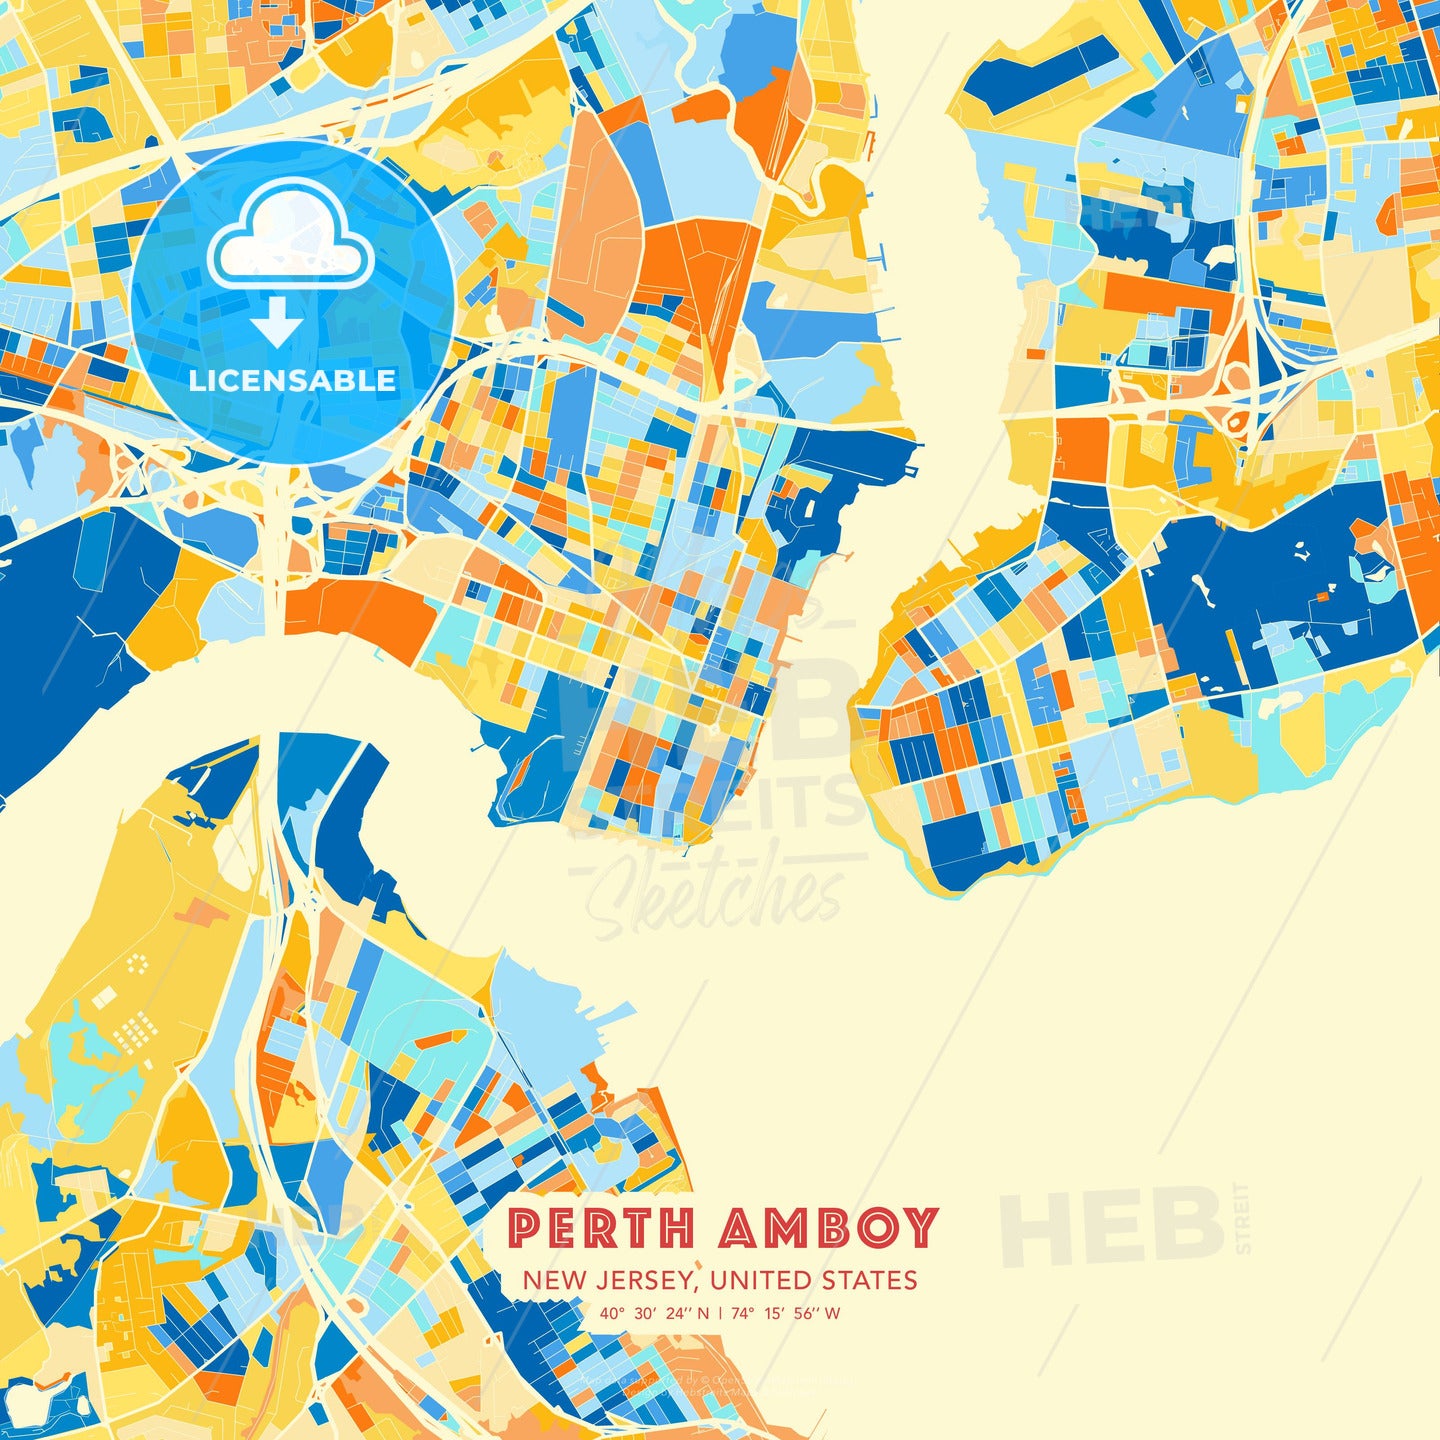 Perth Amboy, New Jersey, United States, map - HEBSTREITS Sketches